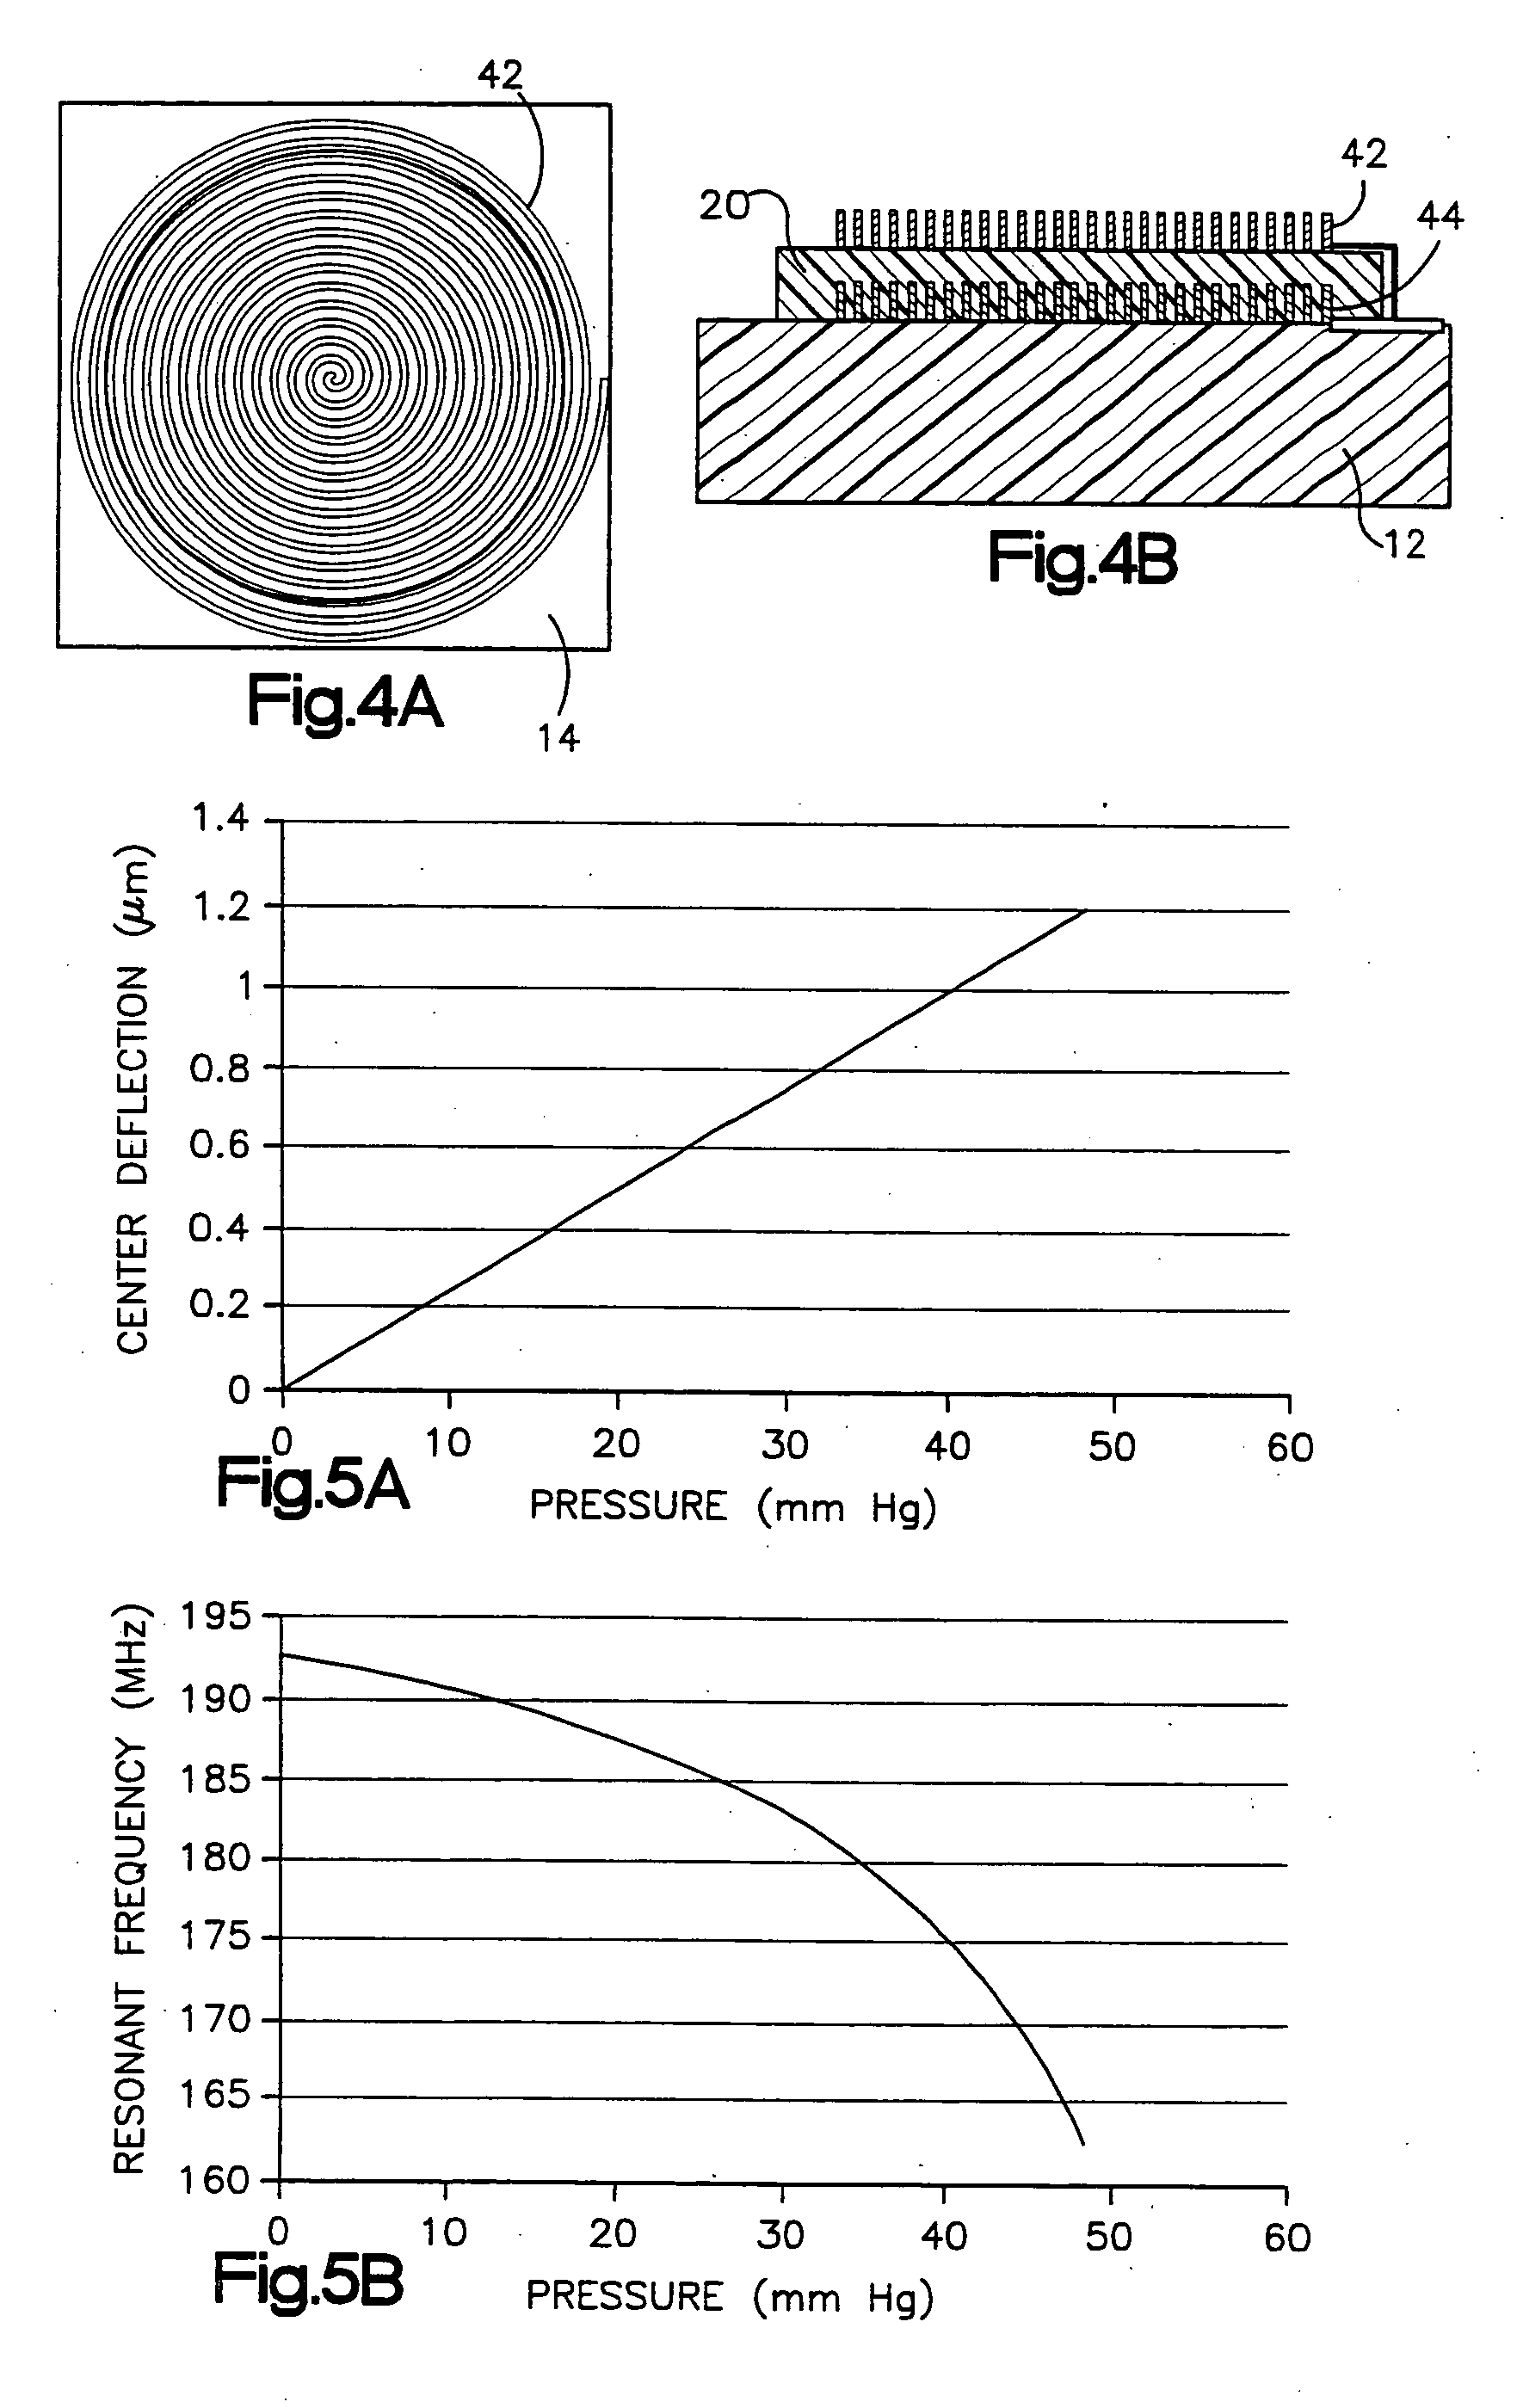 Intraocular pressure measurement system including a sensor mounted in a contact lens